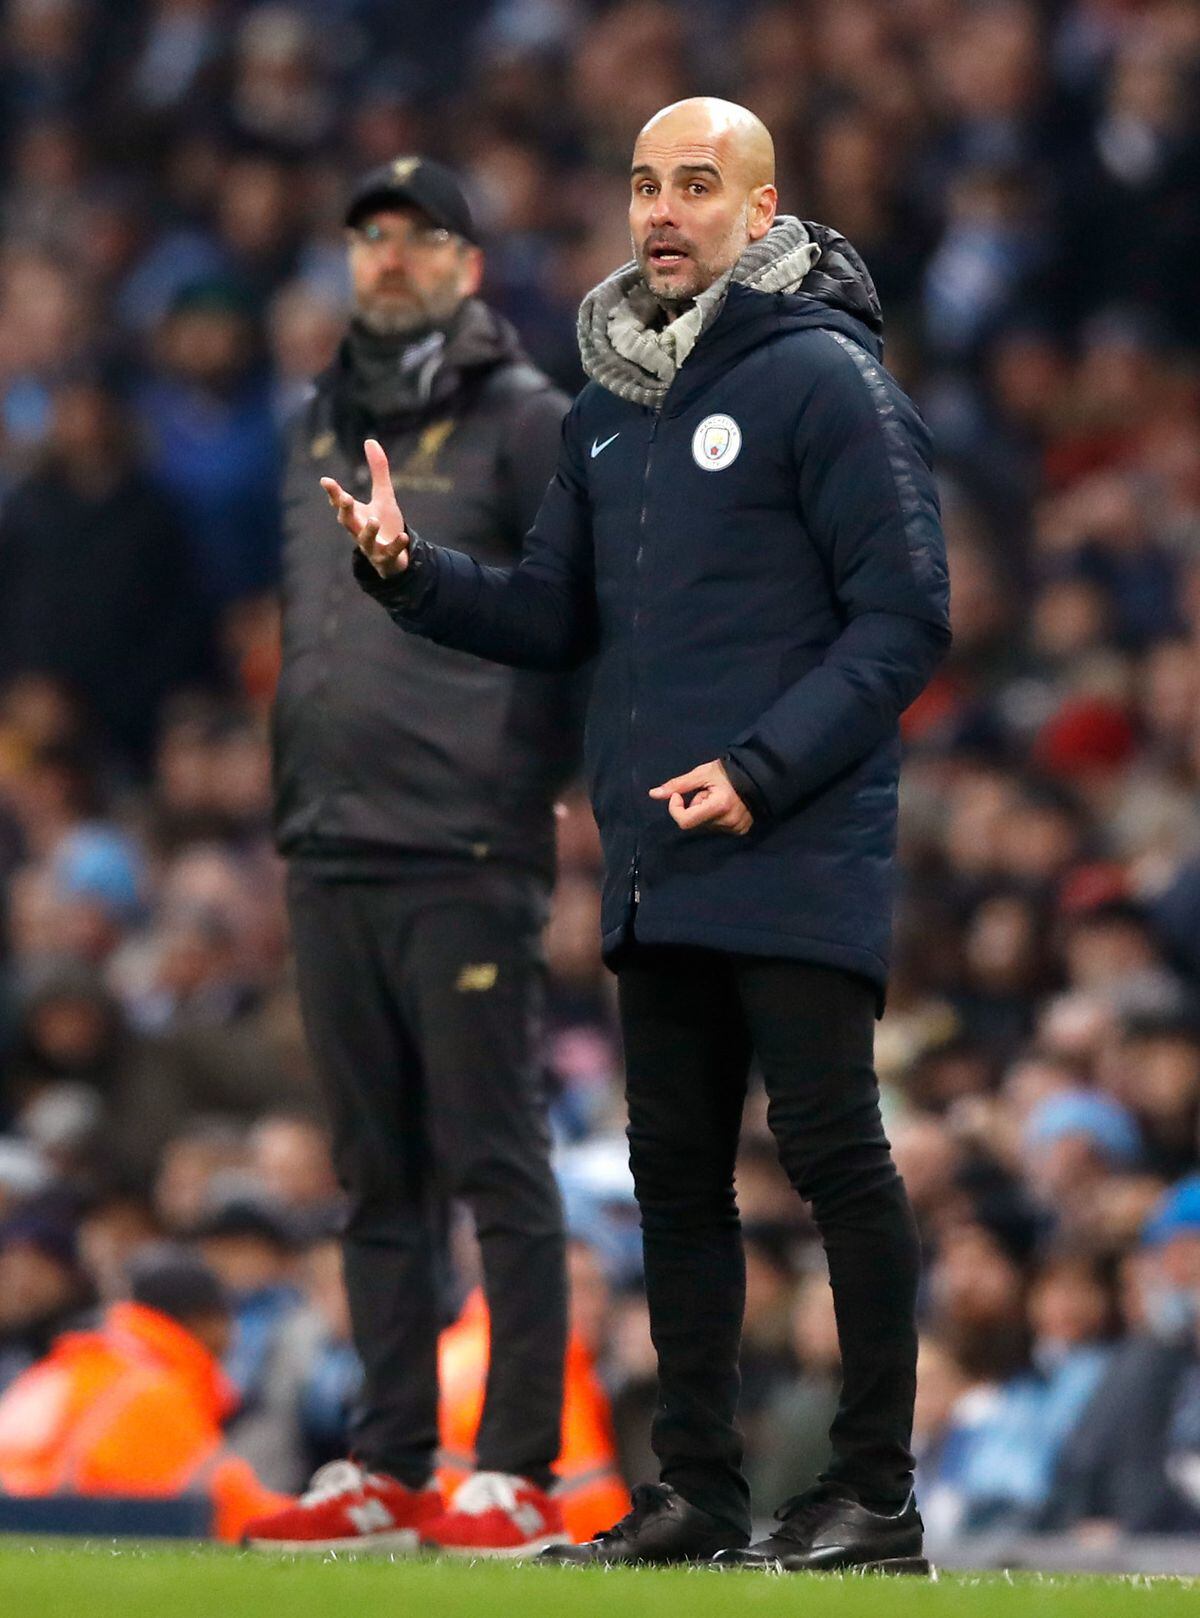 Manchester City manager Pep Guardiola (right) and Liverpool manager Jurgen Klopp during the Premier League match at the Etihad Stadium, Manchester. PRESS ASSOCIATION Photo. Picture date: Thursday January 3, 2019. See PA story SOCCER Man City. Photo credit should read: Martin Rickett/PA Wire. RESTRICTIONS: EDITORIAL USE ONLY No use with unauthorised audio, video, data, fixture lists, club/league logos or "live" services. Online in-match use limited to 120 images, no video emulation. No use in betting, games or single club/league/player publications..